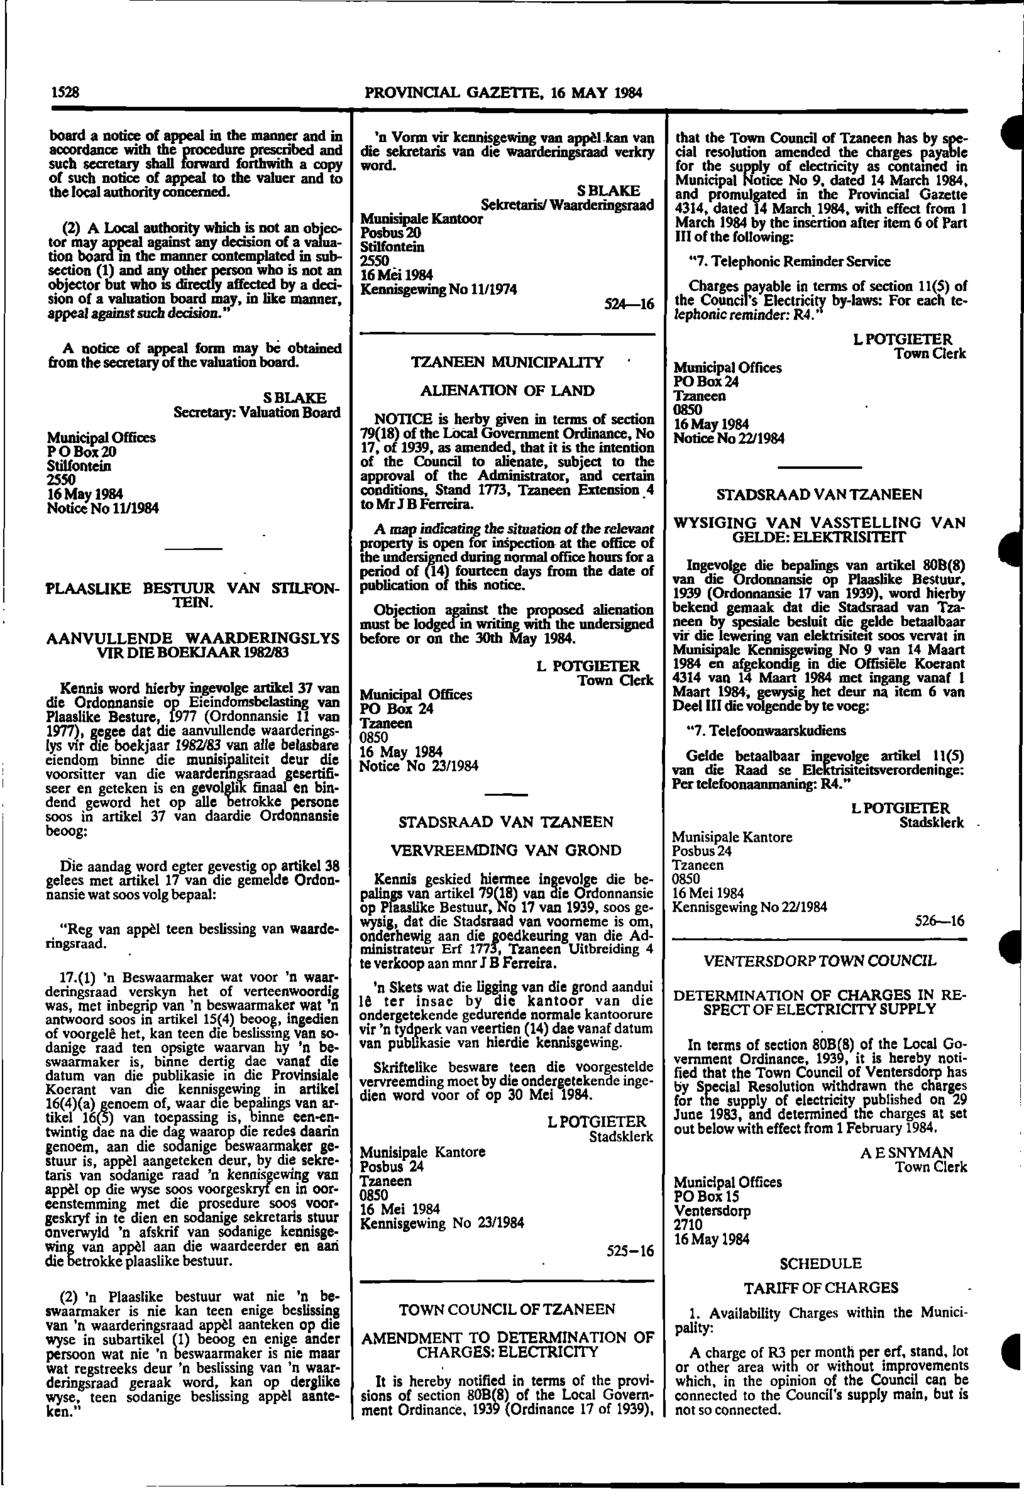 1528 PROVINCIAL GAZETTE, 16 MAY 1984 board a notice of appeal in the manner and in accordance with the procedure prescribed and such secretary shall forward forthwith a copy of such notice of appeal